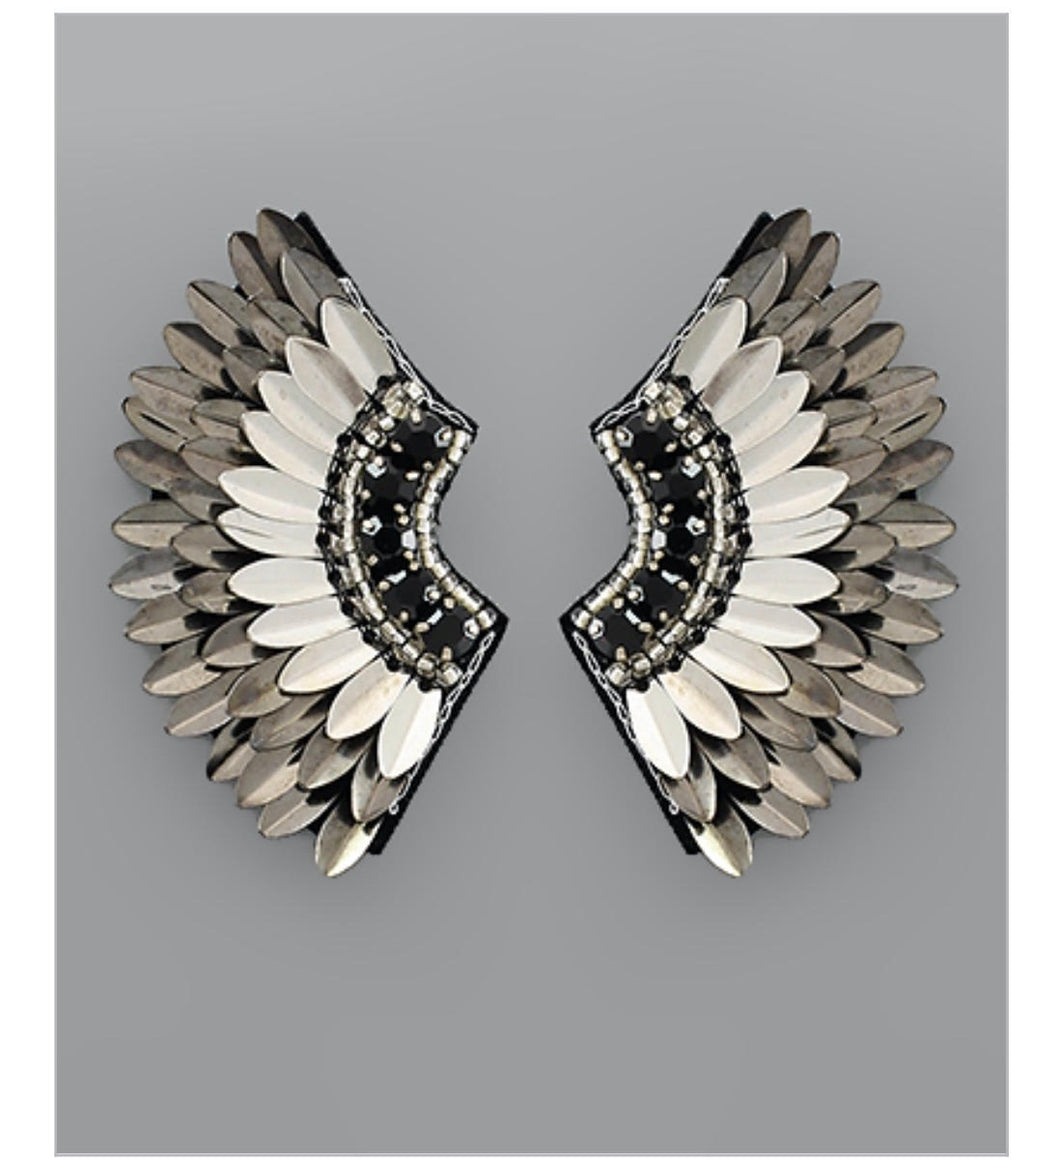 Curved Spiked Wing Earrings